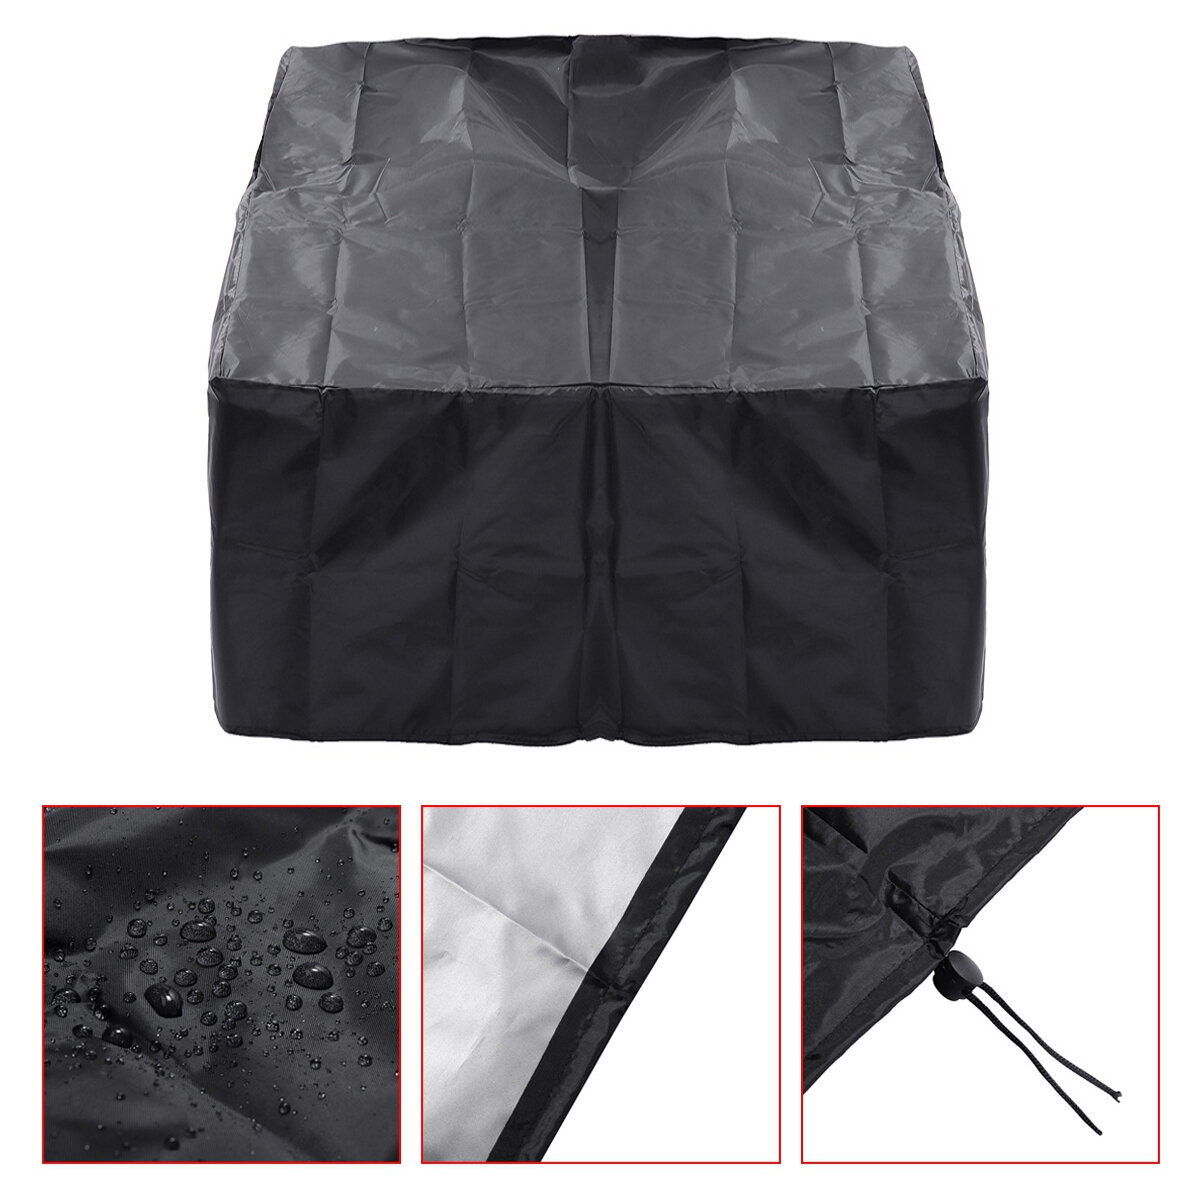 34/40 inch Square Gas Fire Cover Waterproof Anti-UV Heavy Duty Fire Pit Protector for Patio Garden C